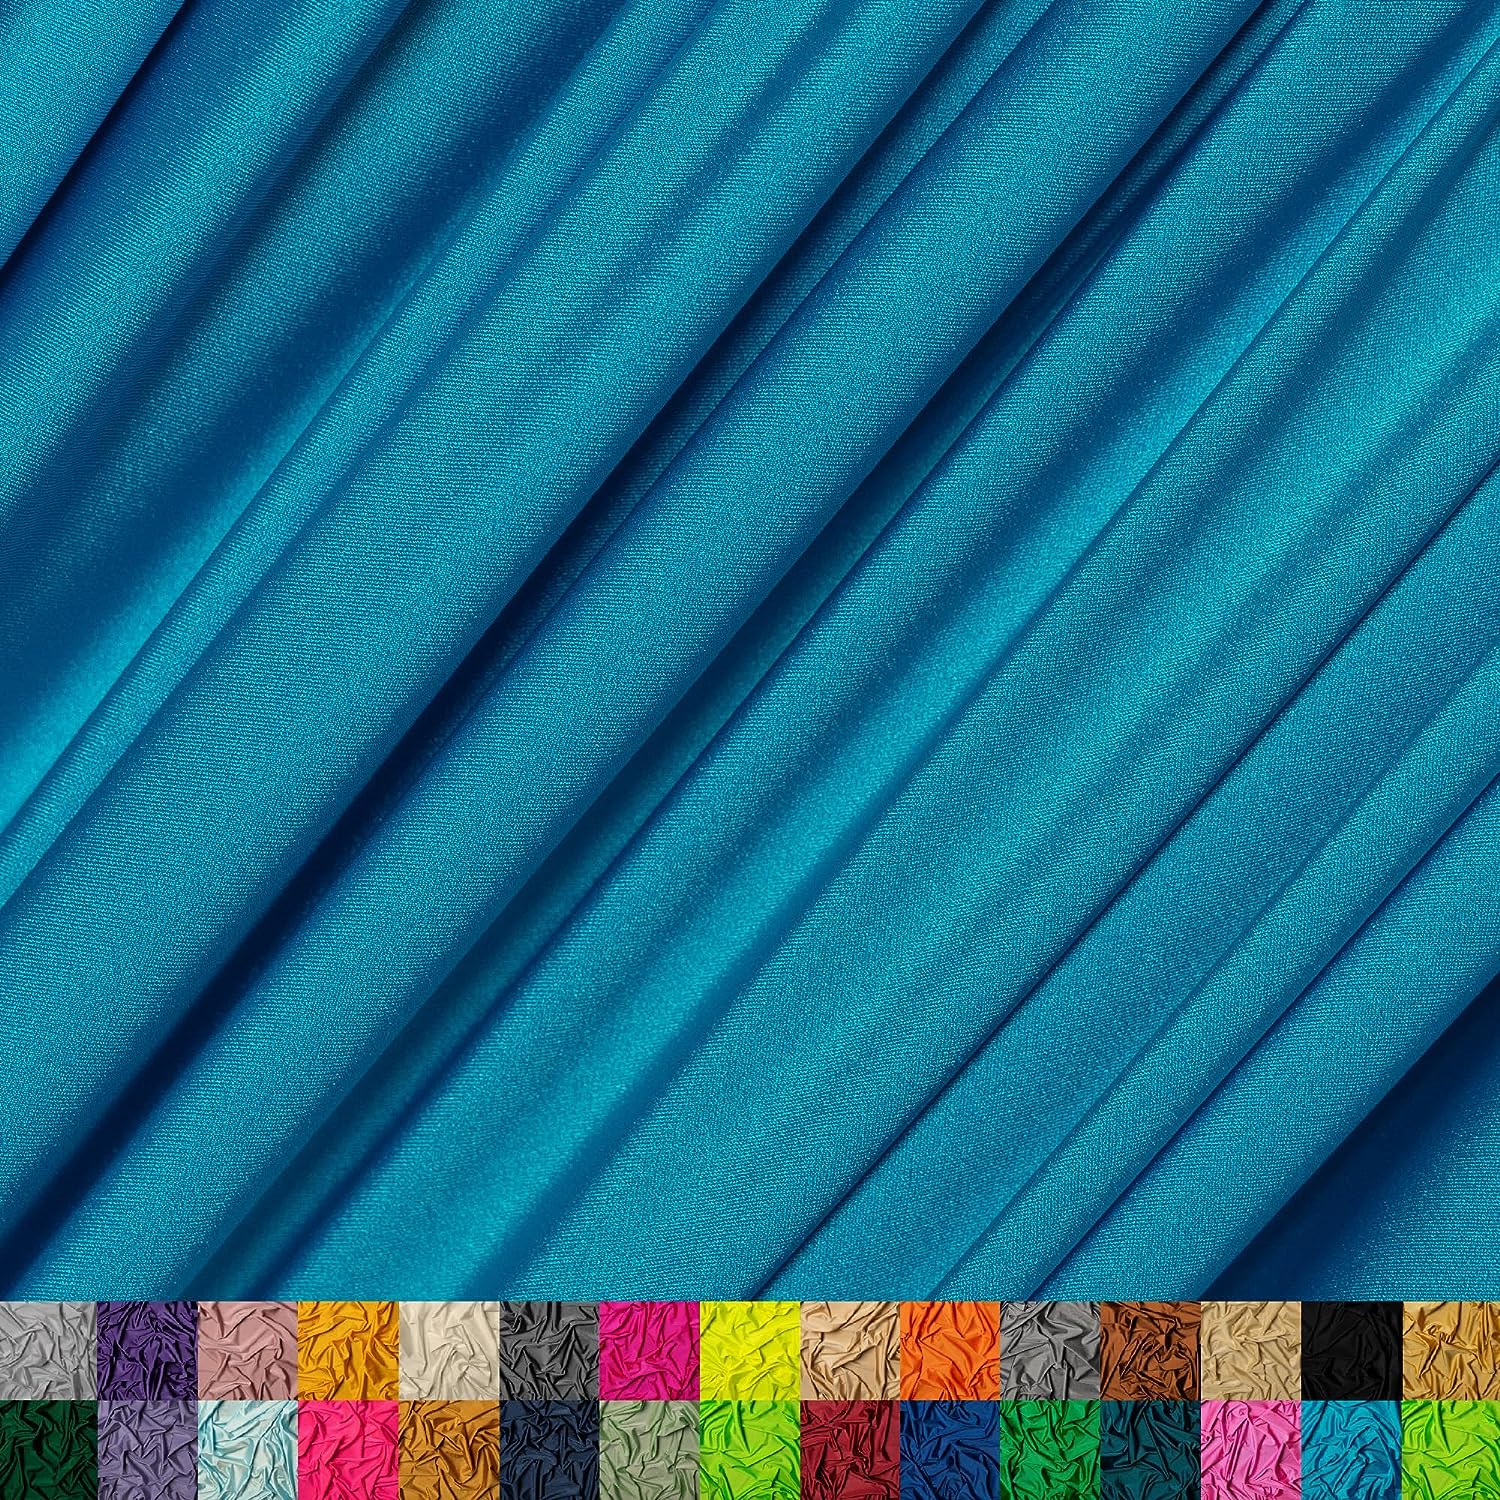 Nylon Spandex Fabric by The Yard - 60 Wide Spandex Swimwear Fabric - 4 Way  Stretch Fabric for Active Wear, Yoga Pants, Table Cloth - Swimsuit Fabric